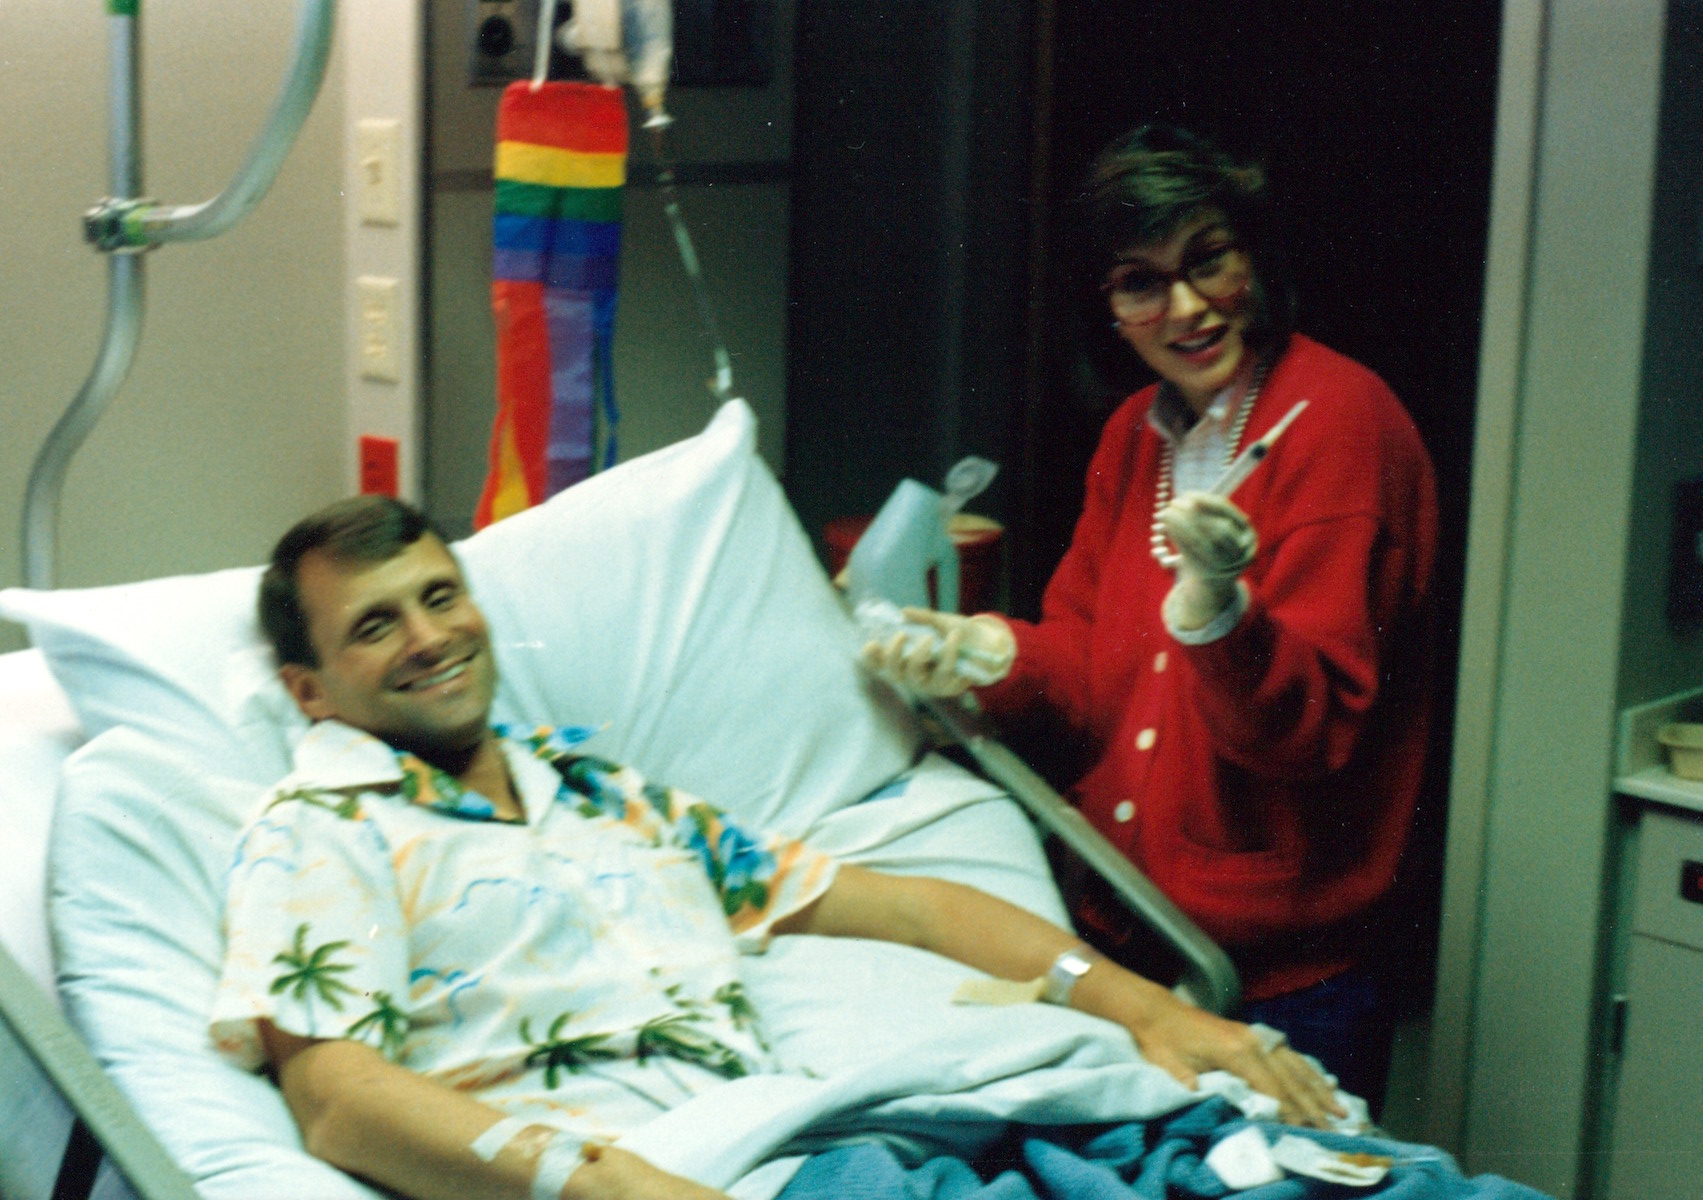 Terry Tebedo and noted entertainer Paul Williams in Tebedo’s hospital room, Dallas, TX, circa 1986. William shares, “After Terry Tebedo’s diagnosis of Non-Hodgkin’s Lymphoma, he had surgery to remove his spleen that was enlarged by chemotherapy. We arranged for Paul Williams to visit.” Photo courtesy of William Waybourn.